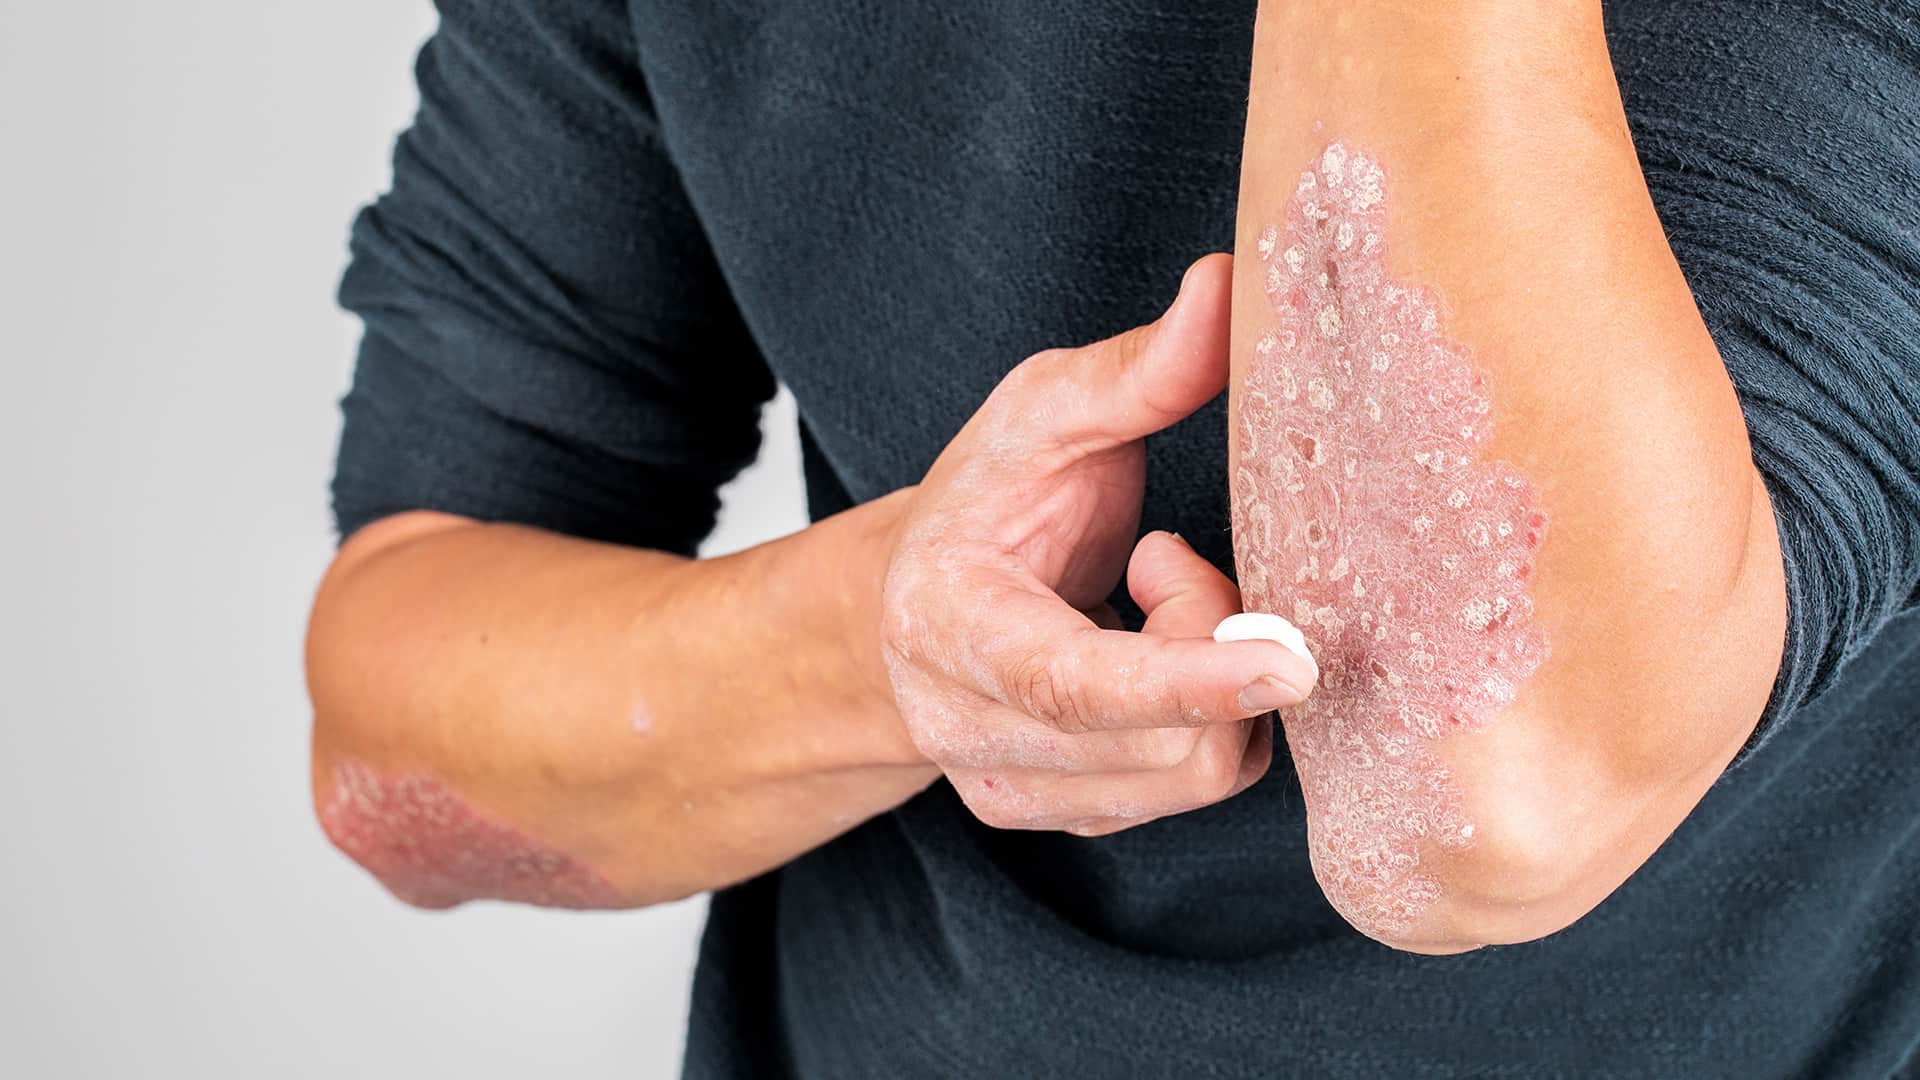 psoriasis conditions -apply topical creams or ointments on affected areas